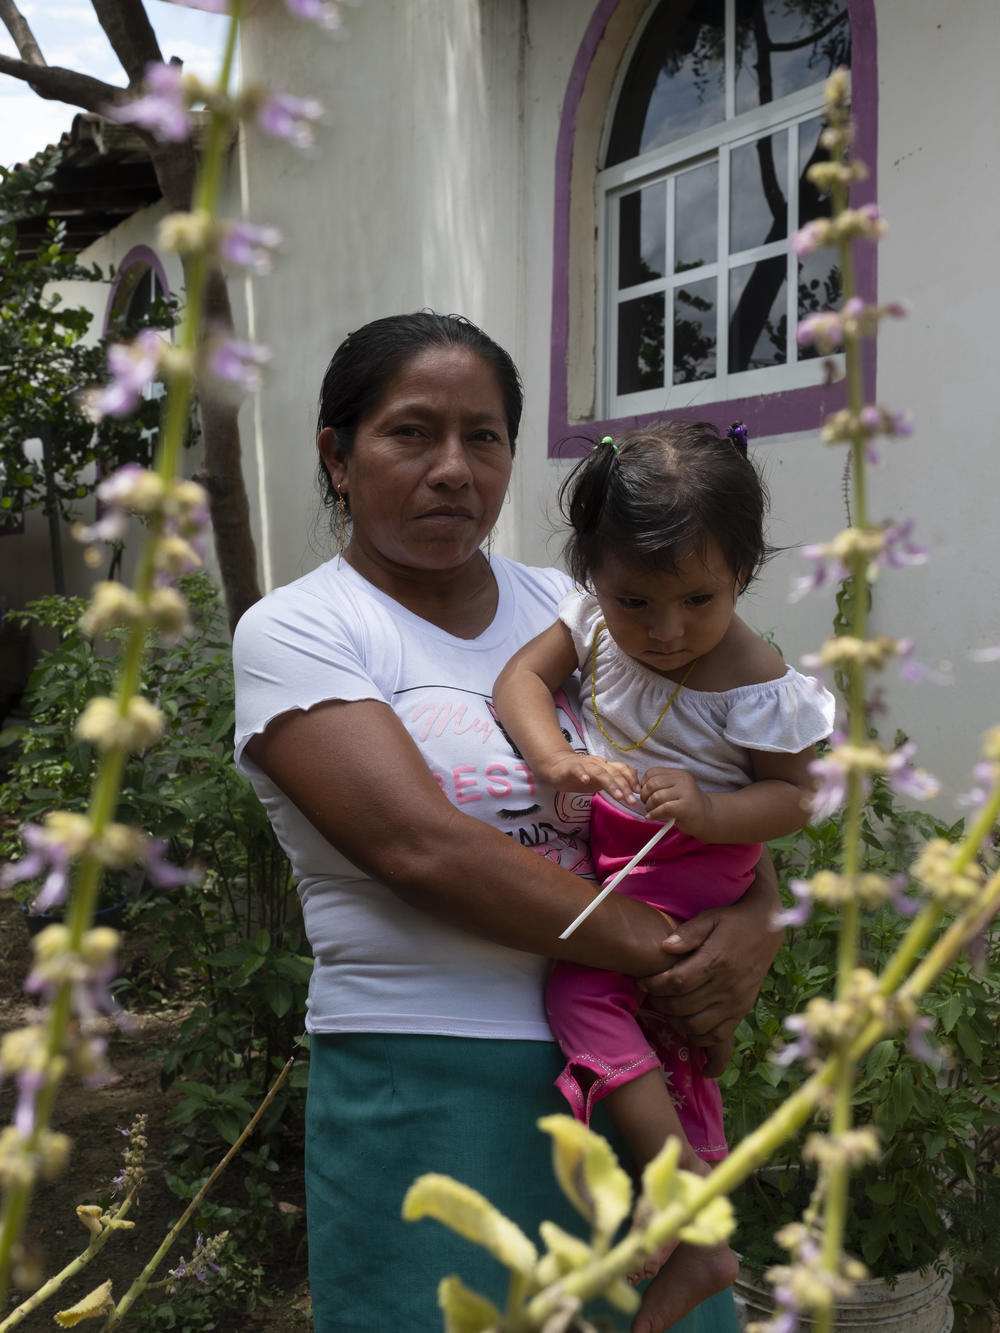 Paula Cano, a traditional midwife, holds her youngest child, who suffers a disability in her motor system. Paula thinks her daughter's disability is a result of her cesarean birth and because she wasn't allowed to keep the placenta to conduct the proper rituals.